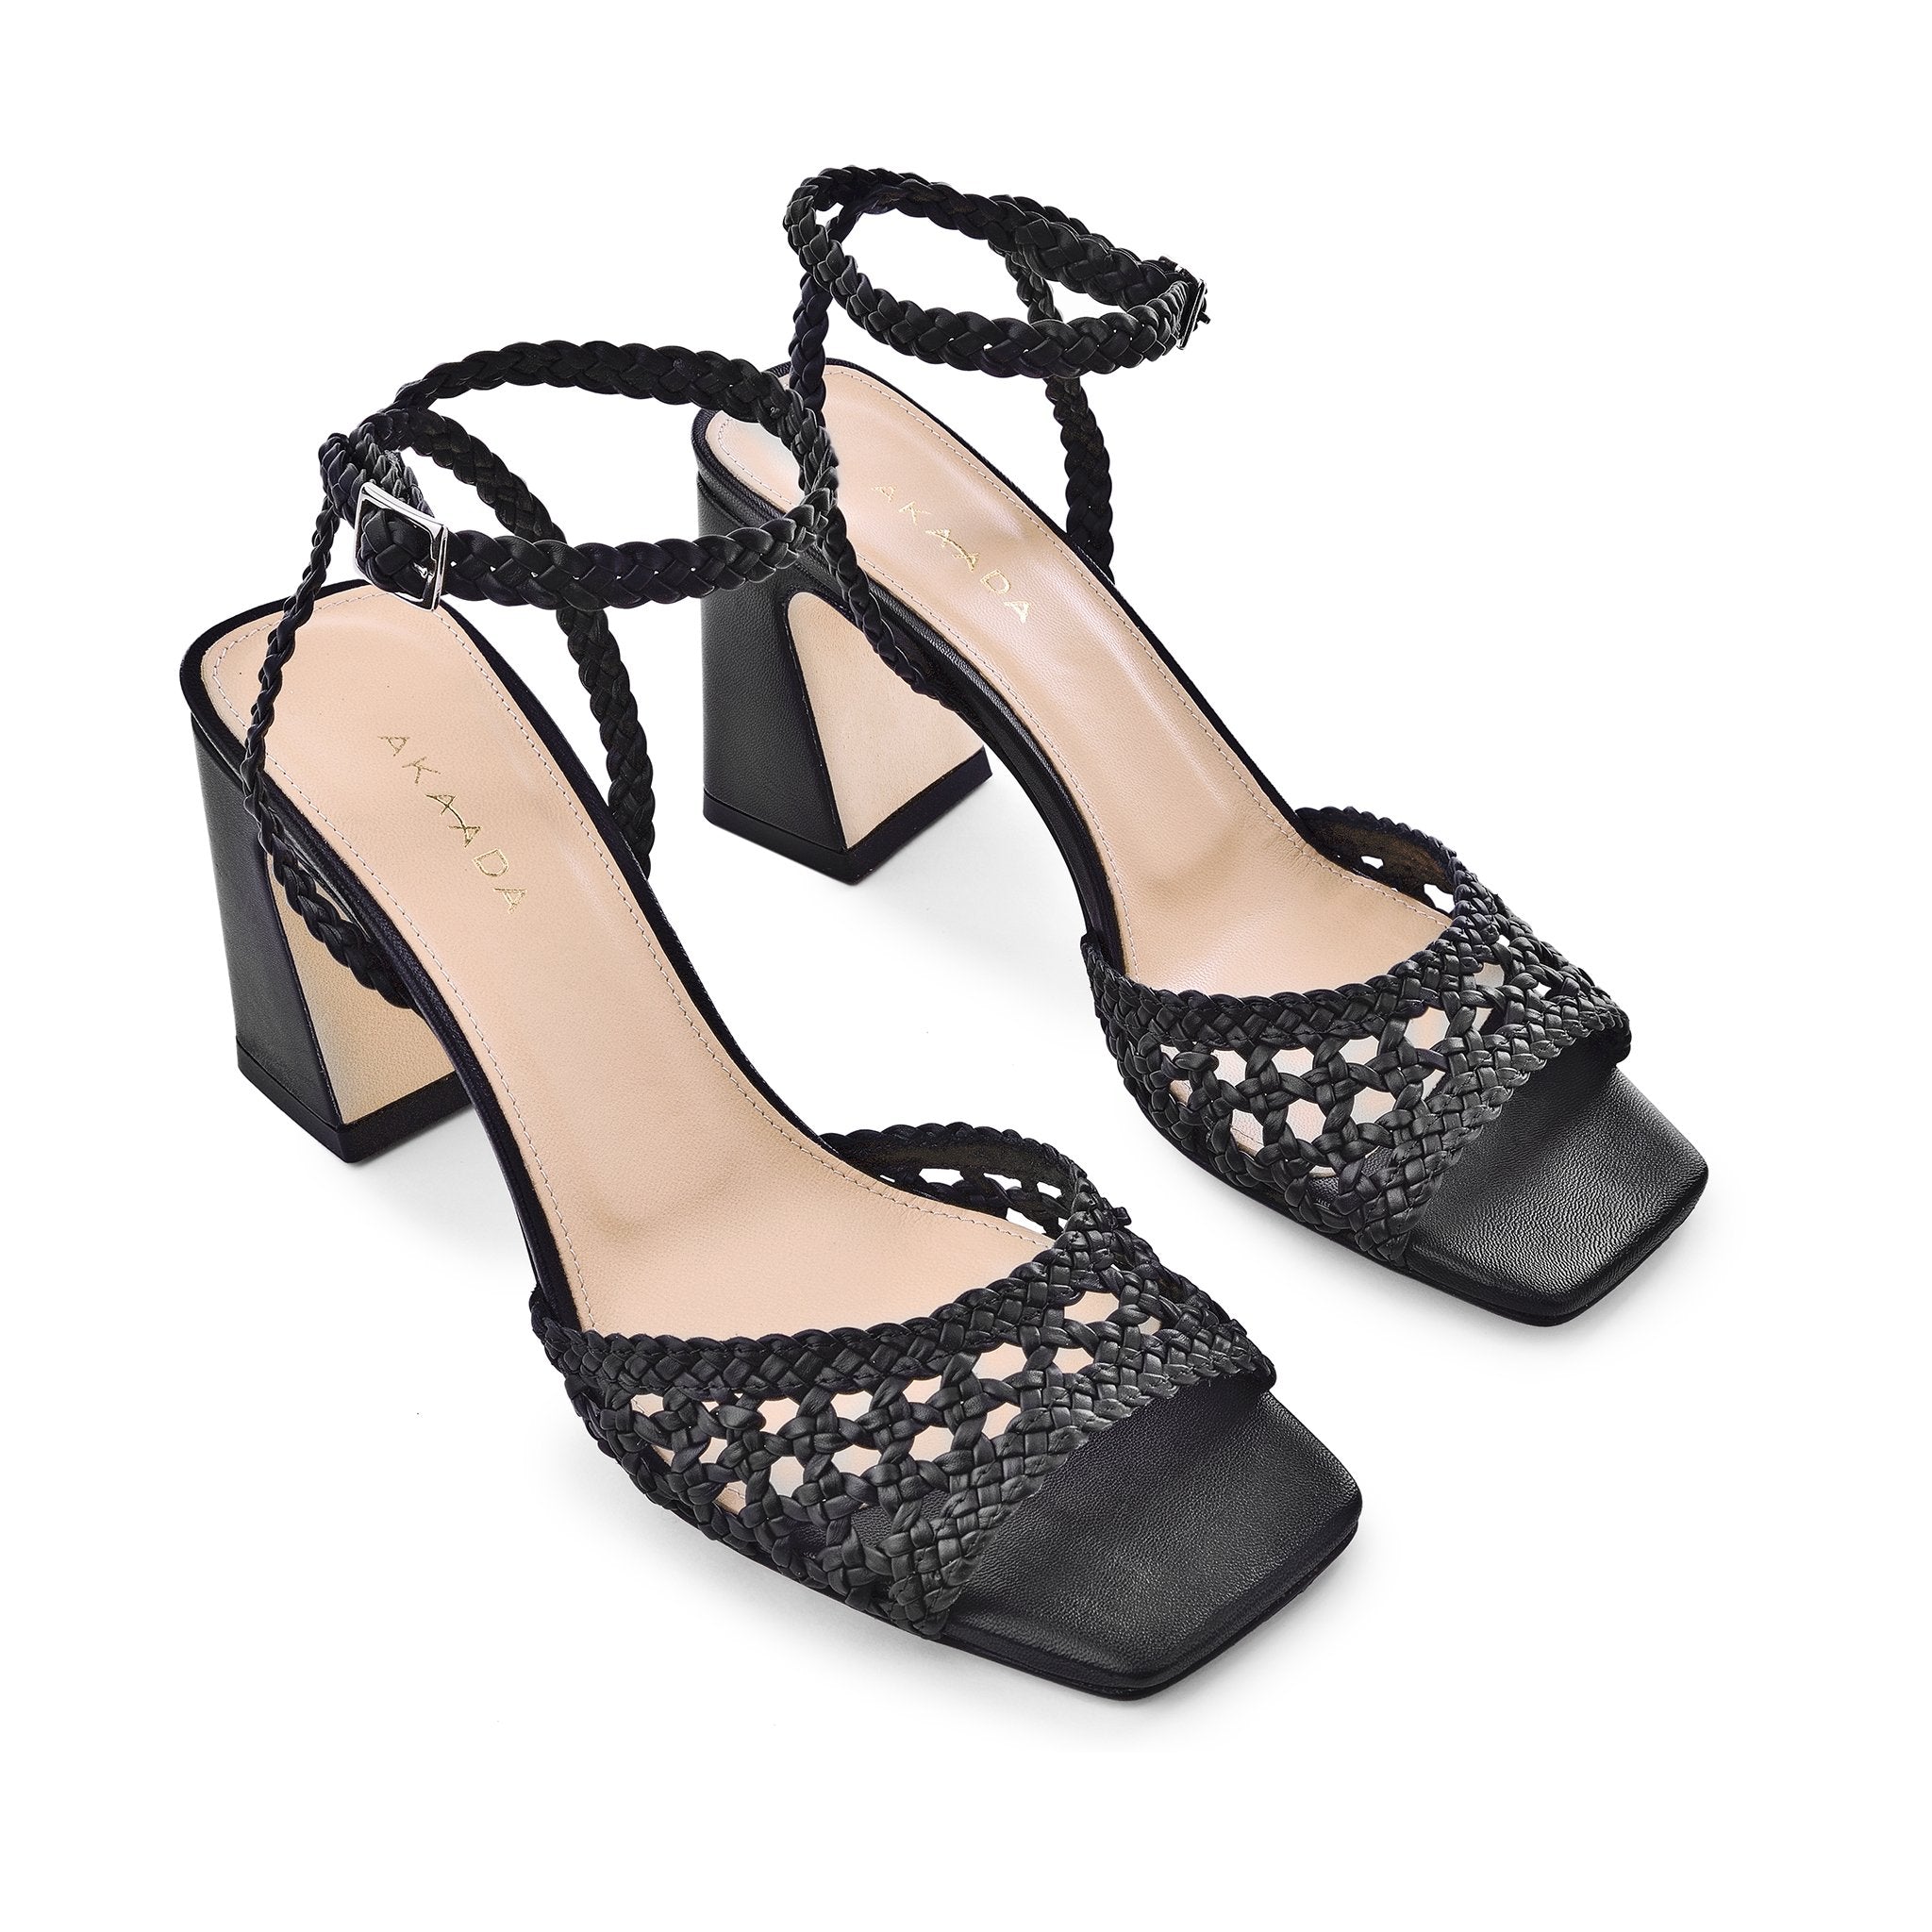 Tama Black Woven Leather Sandals 1418-02 - 7